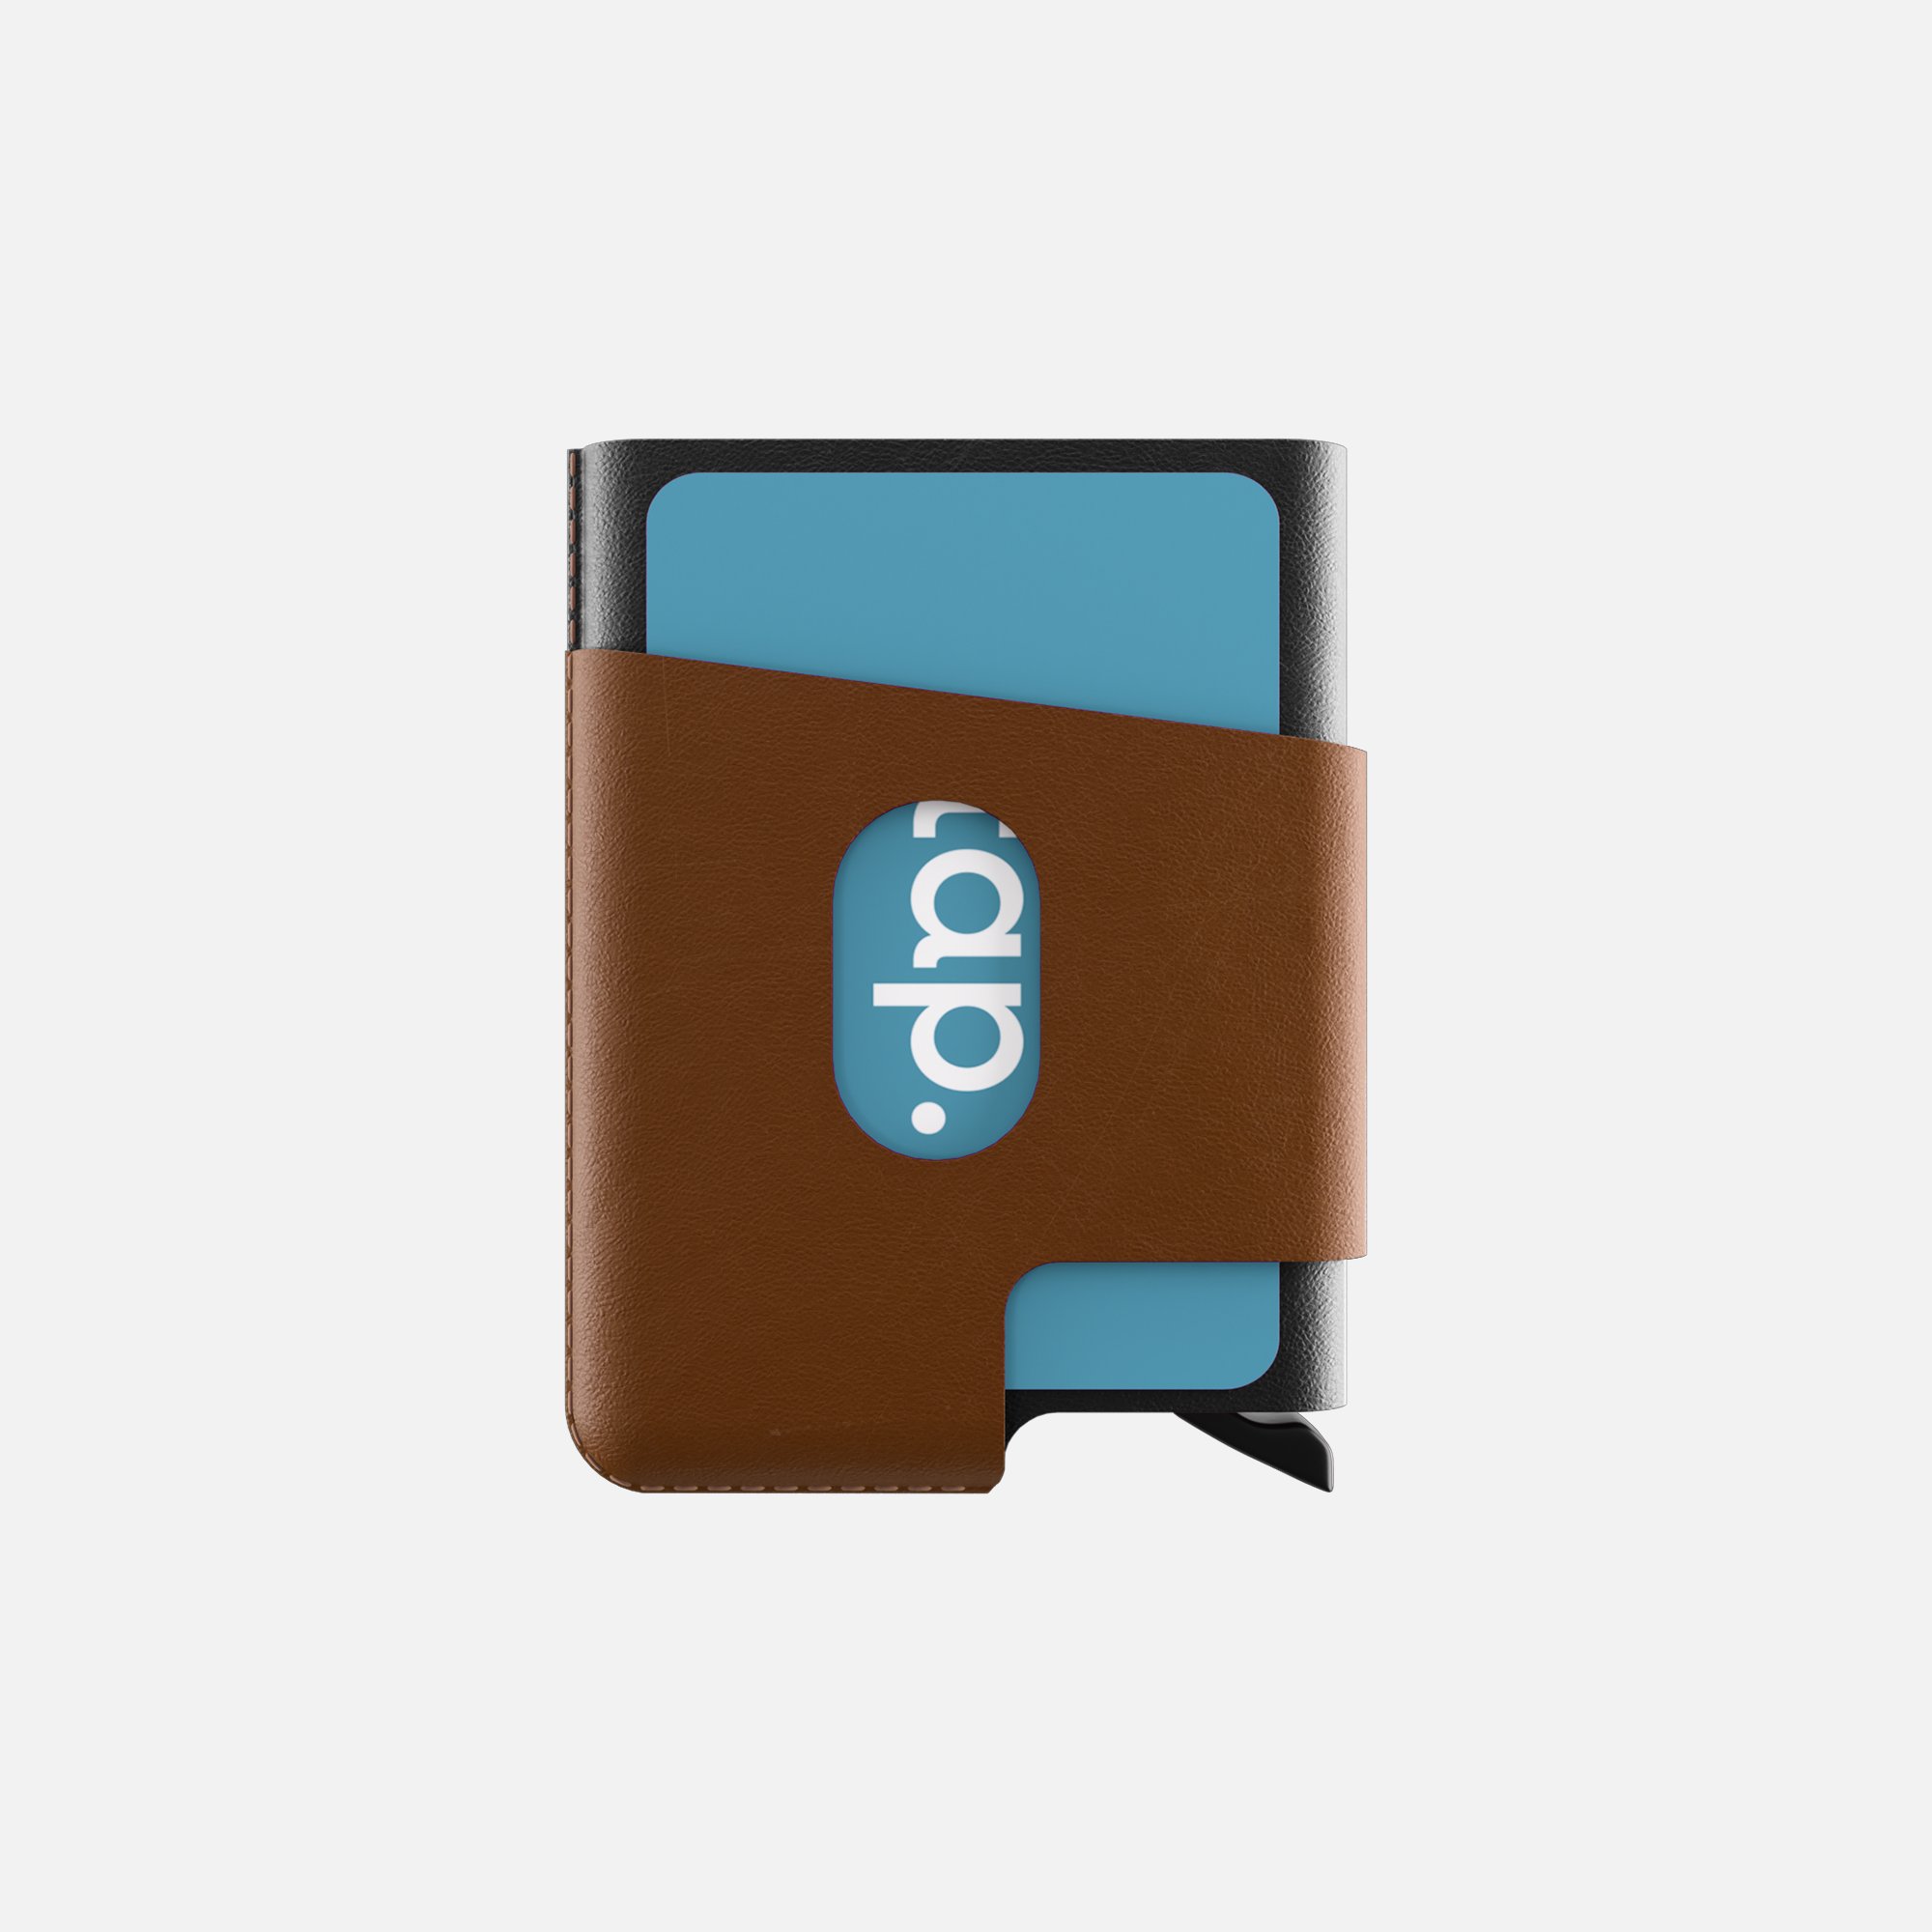 Brown leather wallet with a blue colored tap NFC card and logo on cover, isolated on white background.